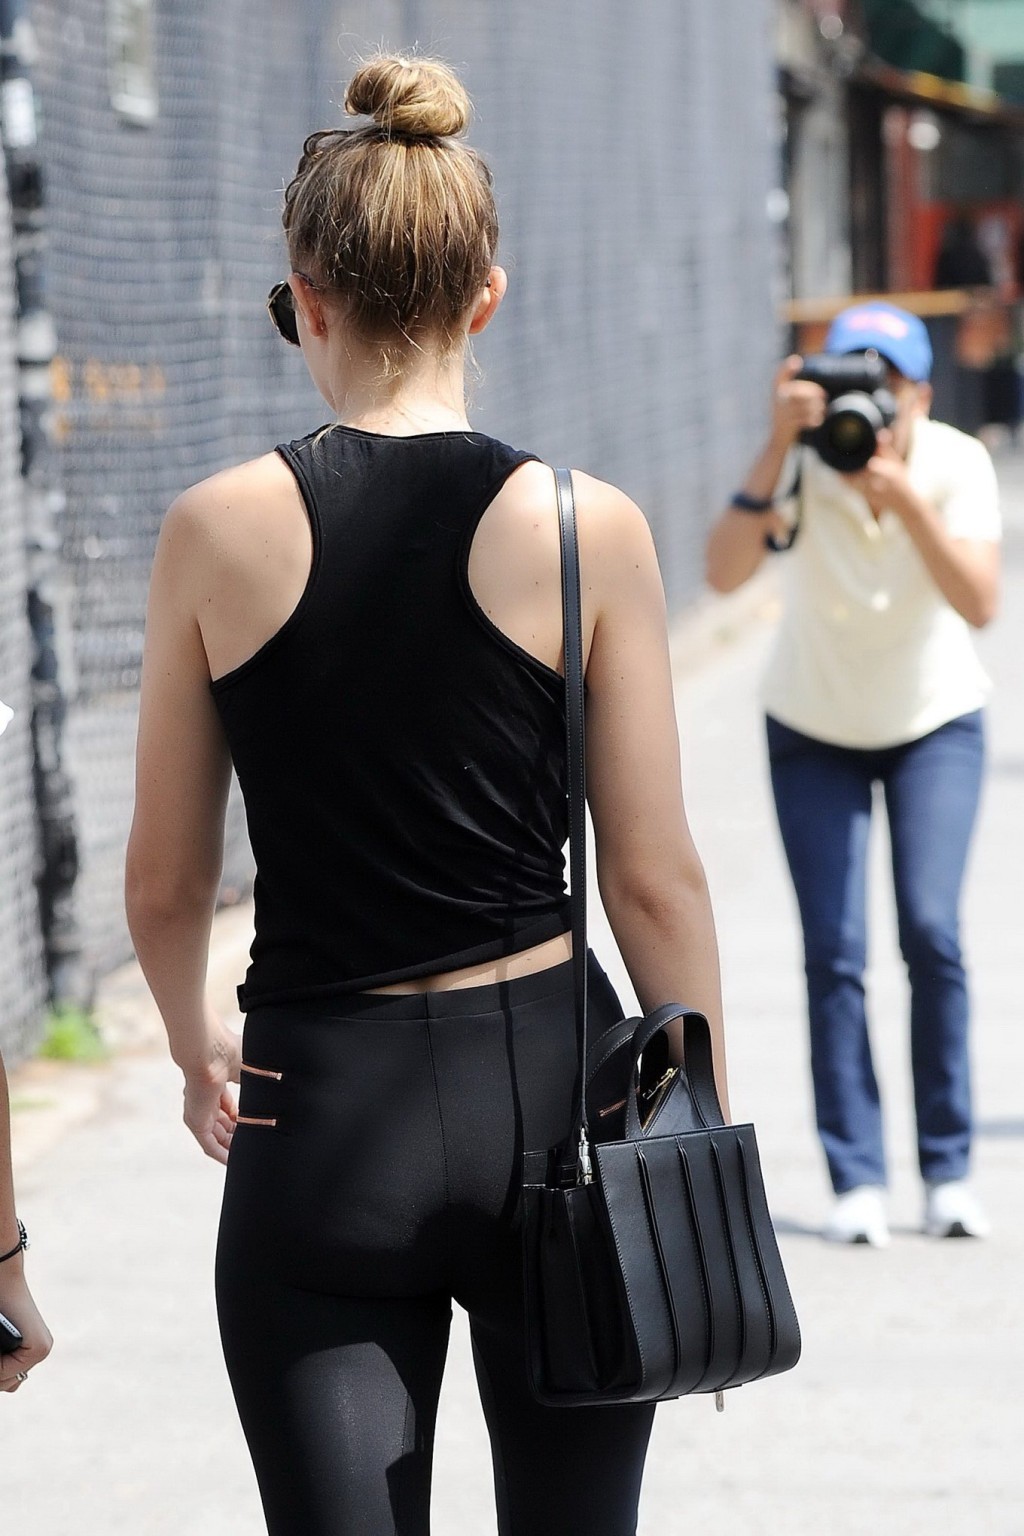 Gigi Hadid showing off her ass in black tights out in NYC #75162619